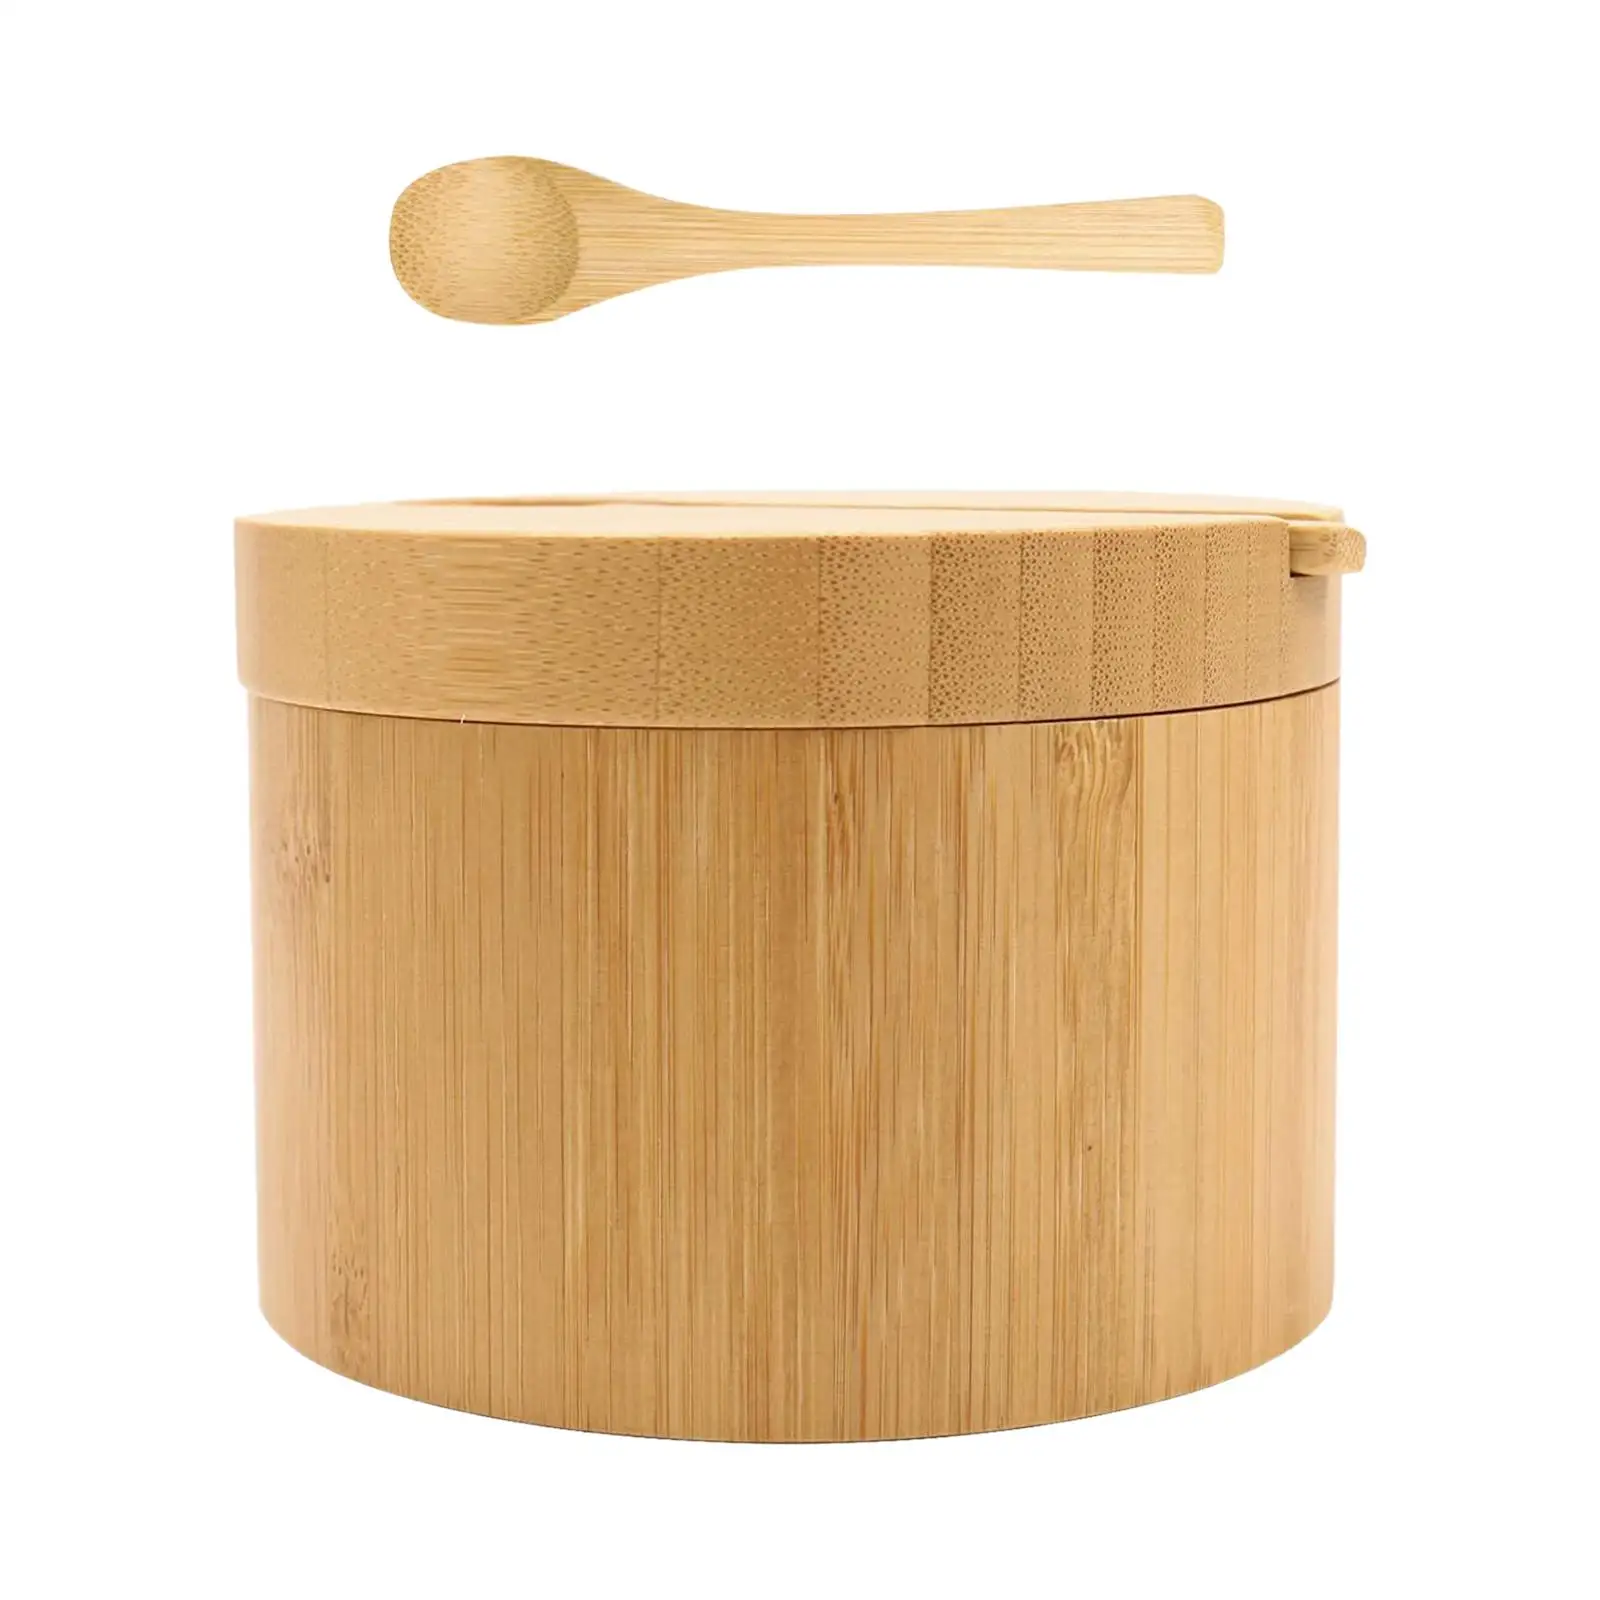 Wood Box for Spices with Magnetic Lid and Spoon Cylinder Spices Holder Desk Office Storage for Tea Salt Kitchen Countertop